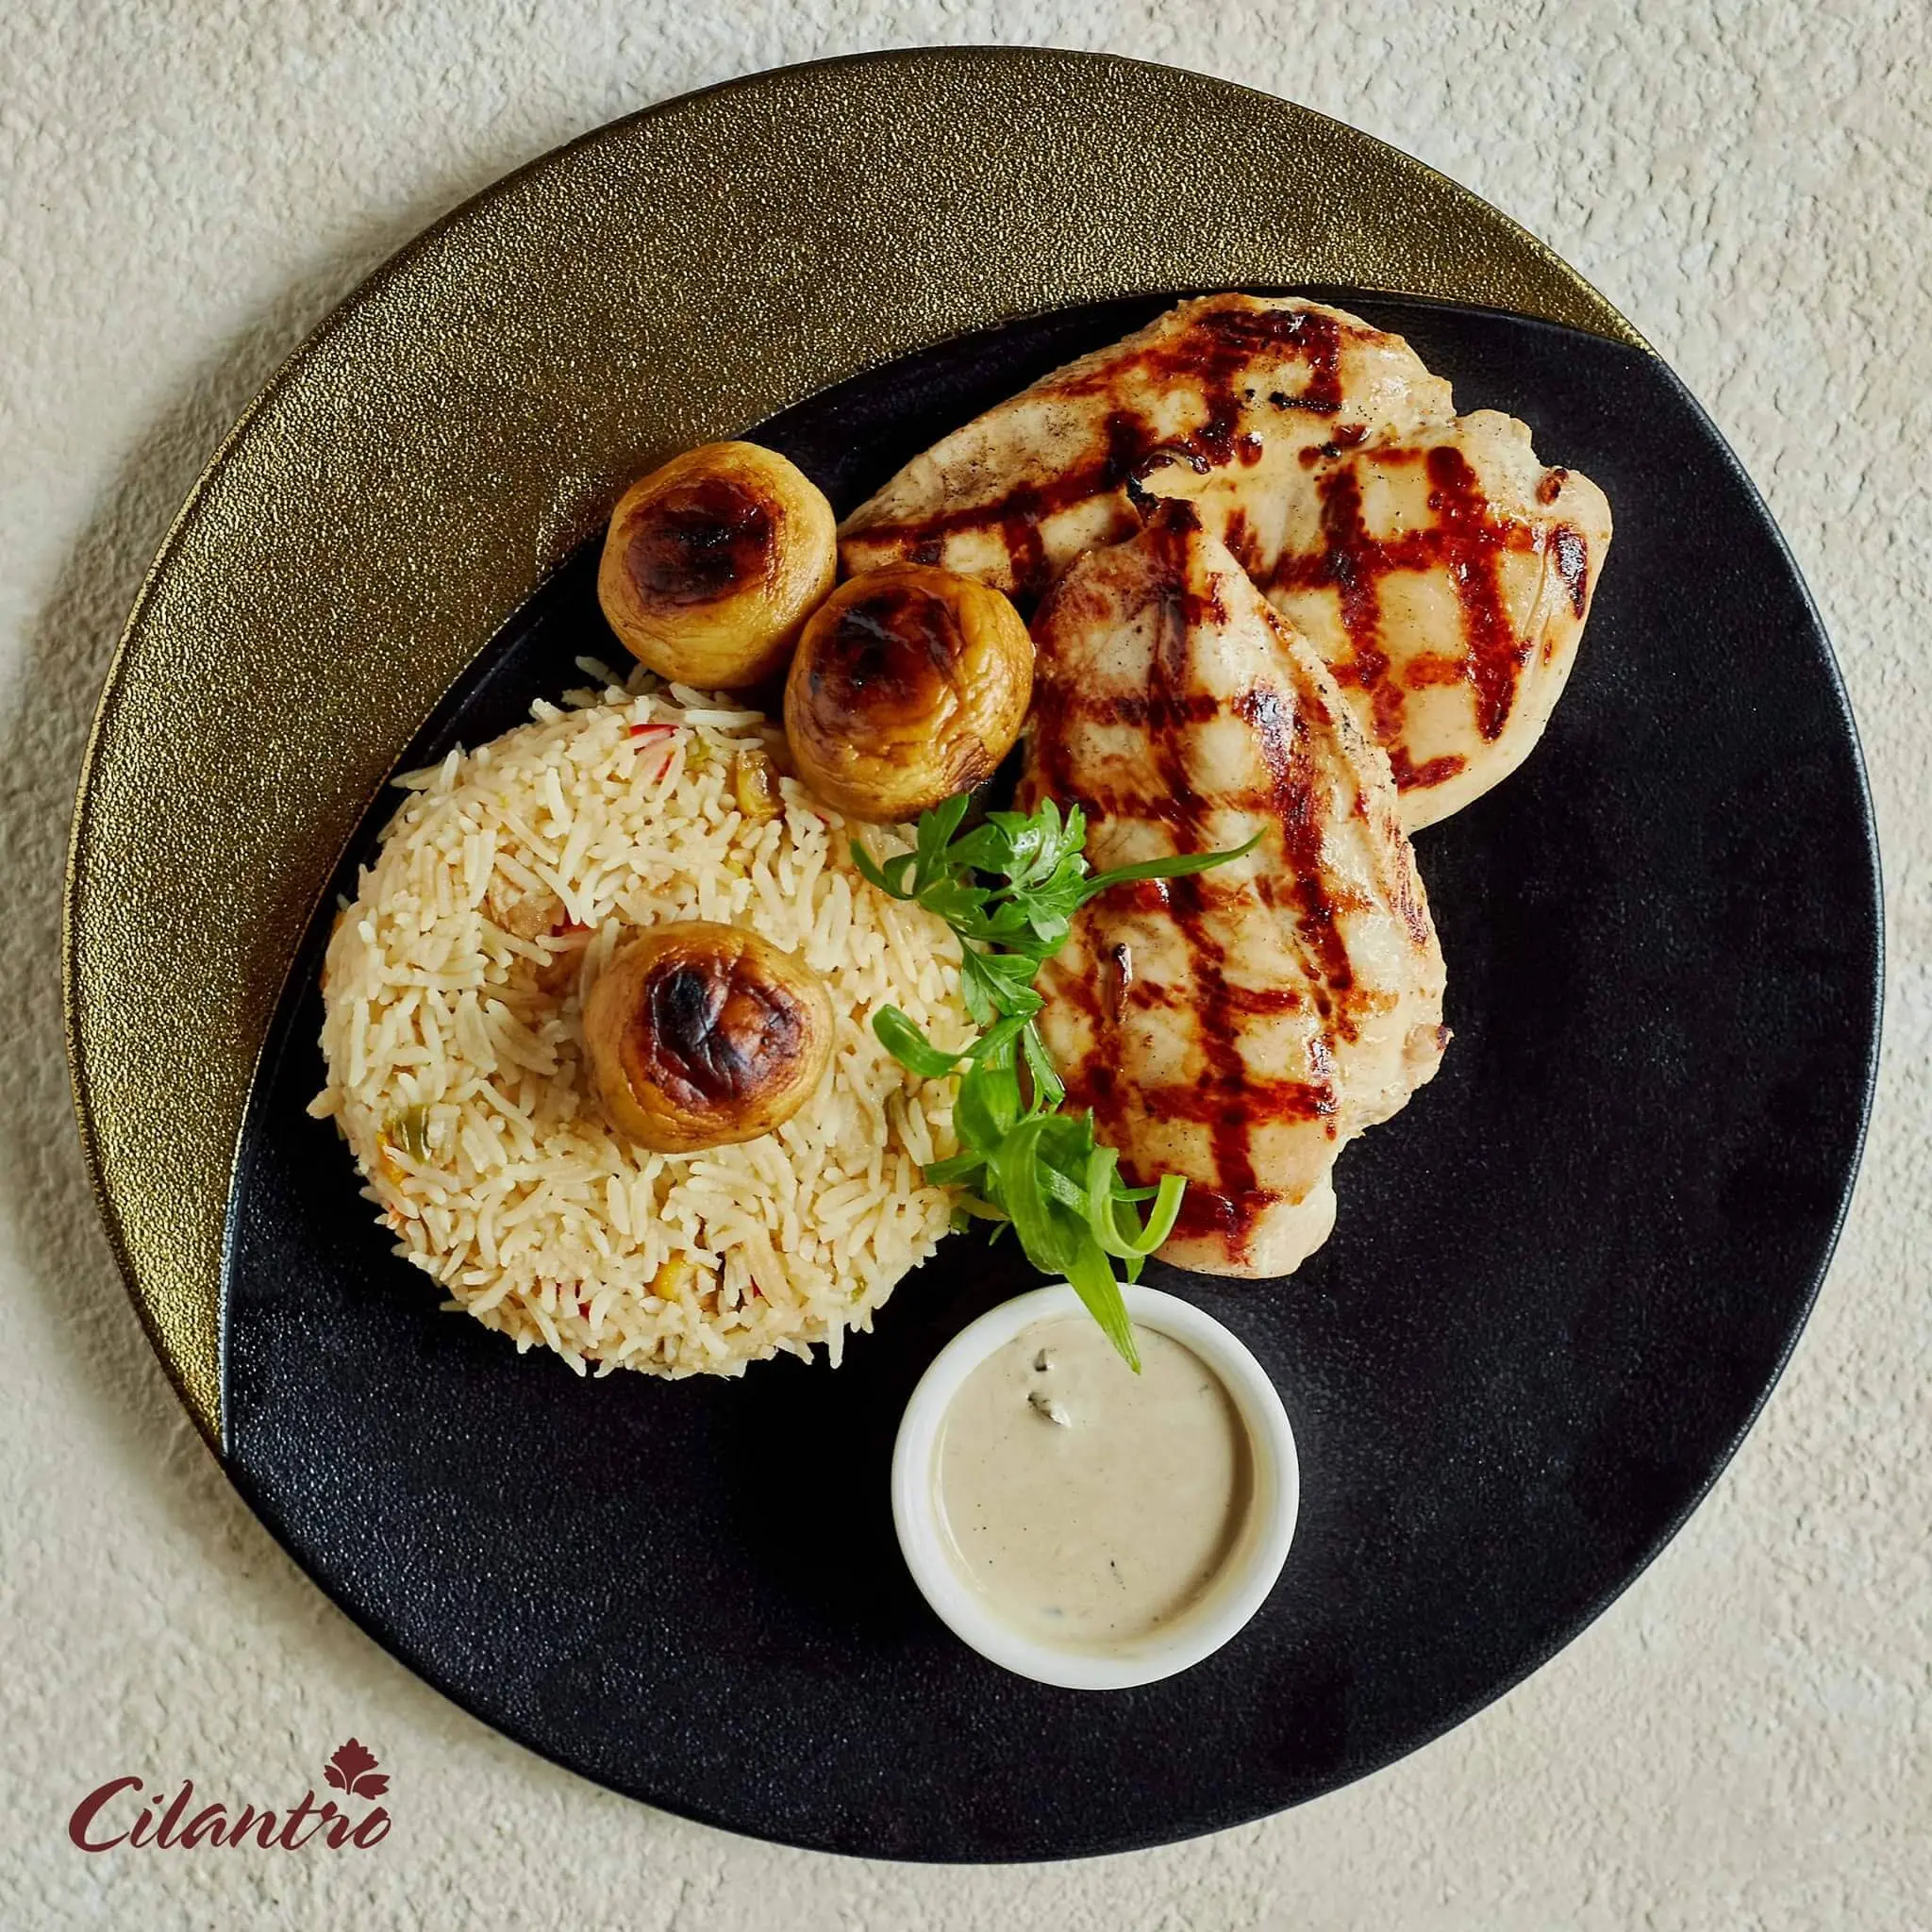 Perfectly Grilled Chicken and Mushroom - a feast for the senses